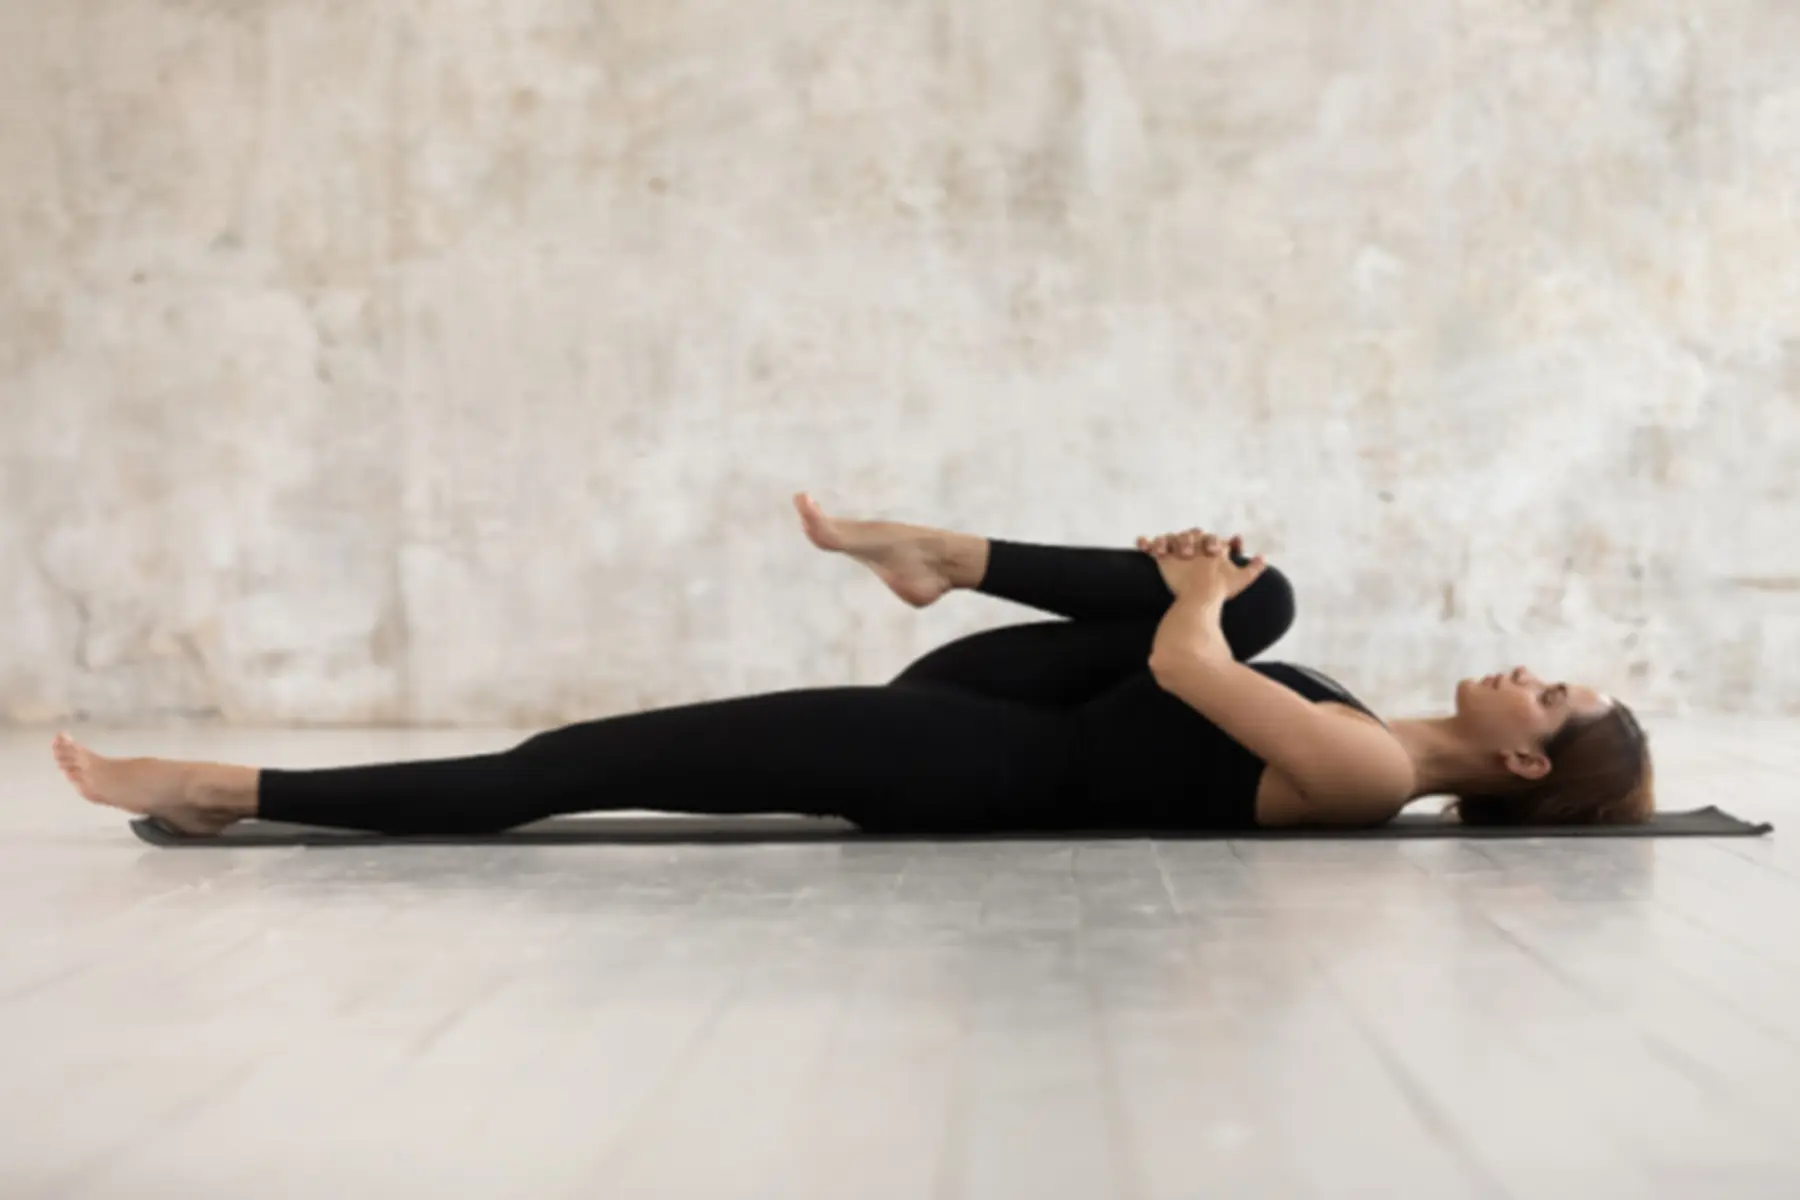 A woman lays on a yoga mat and stretches her knee to her chest.